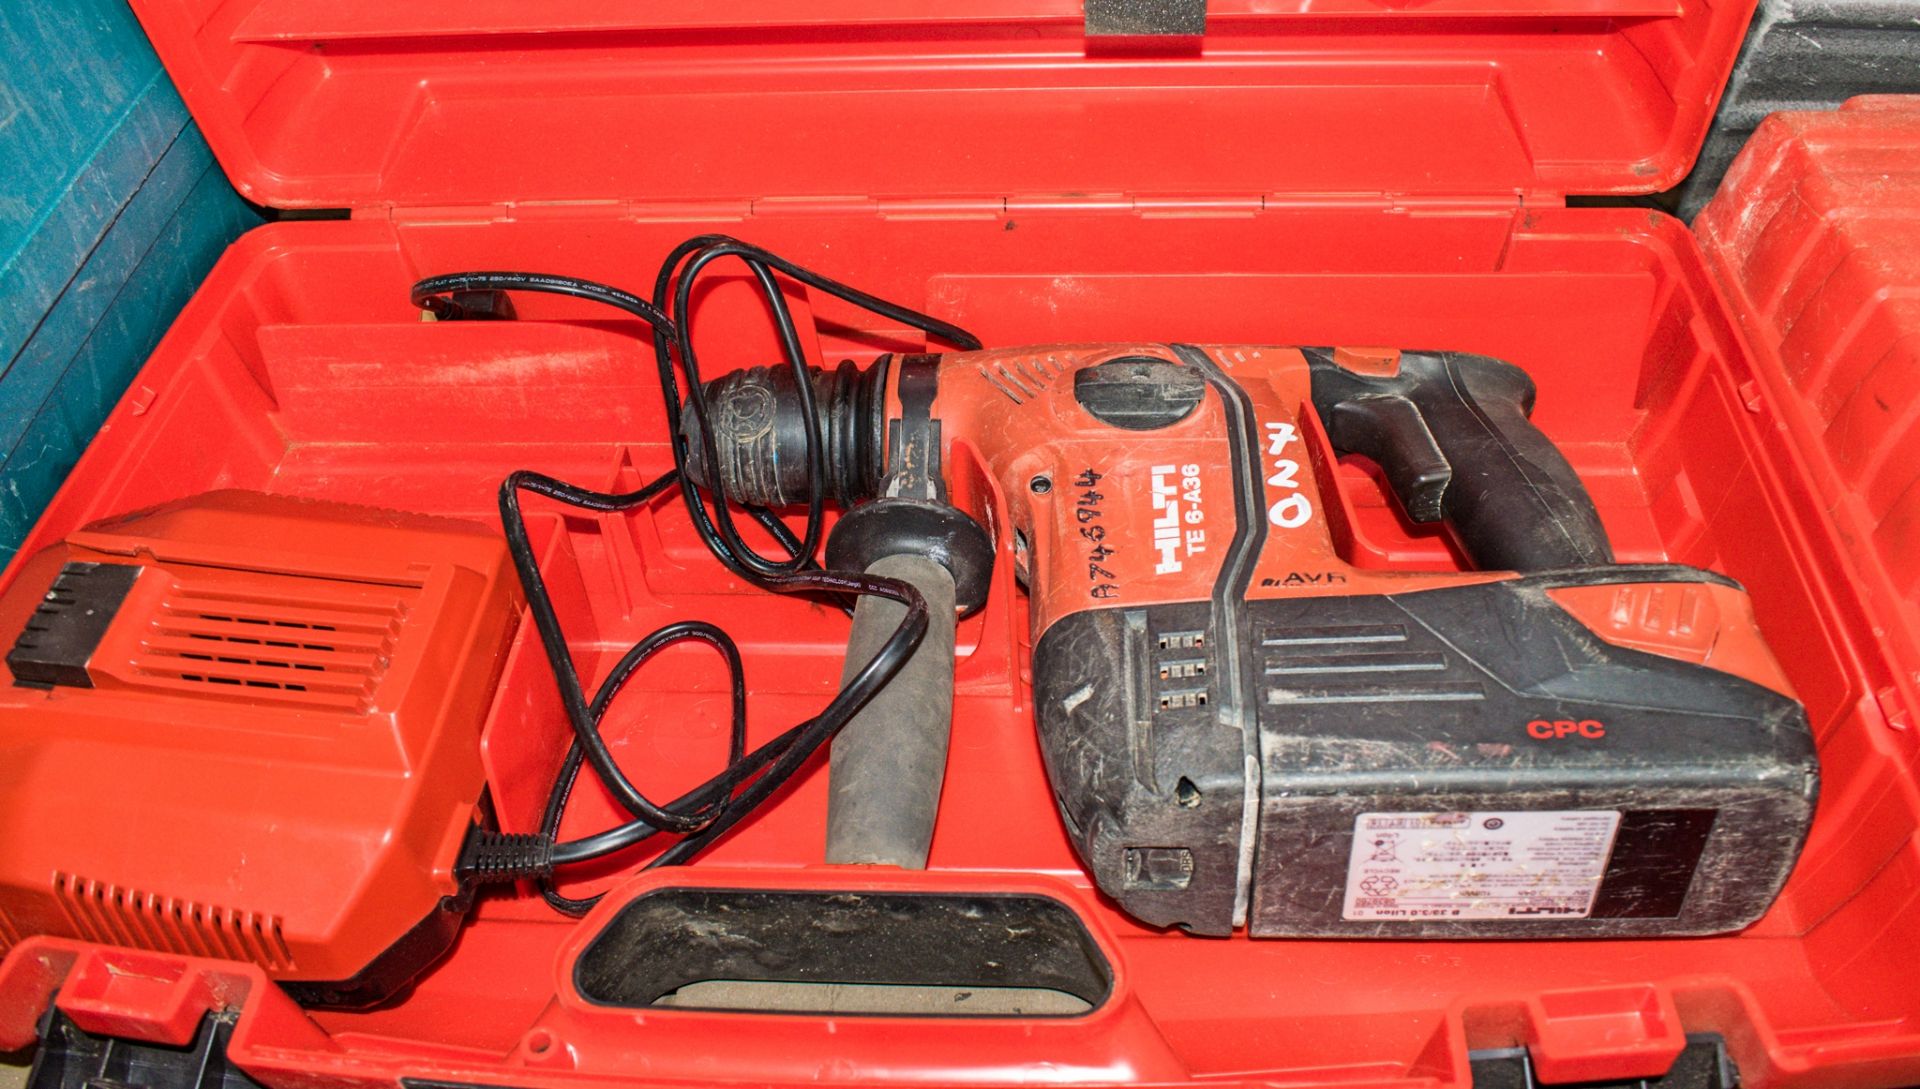 Hilti TE6-A36 36v cordless SDS rotary hammer drill c/w battery, charger & carry case A746944